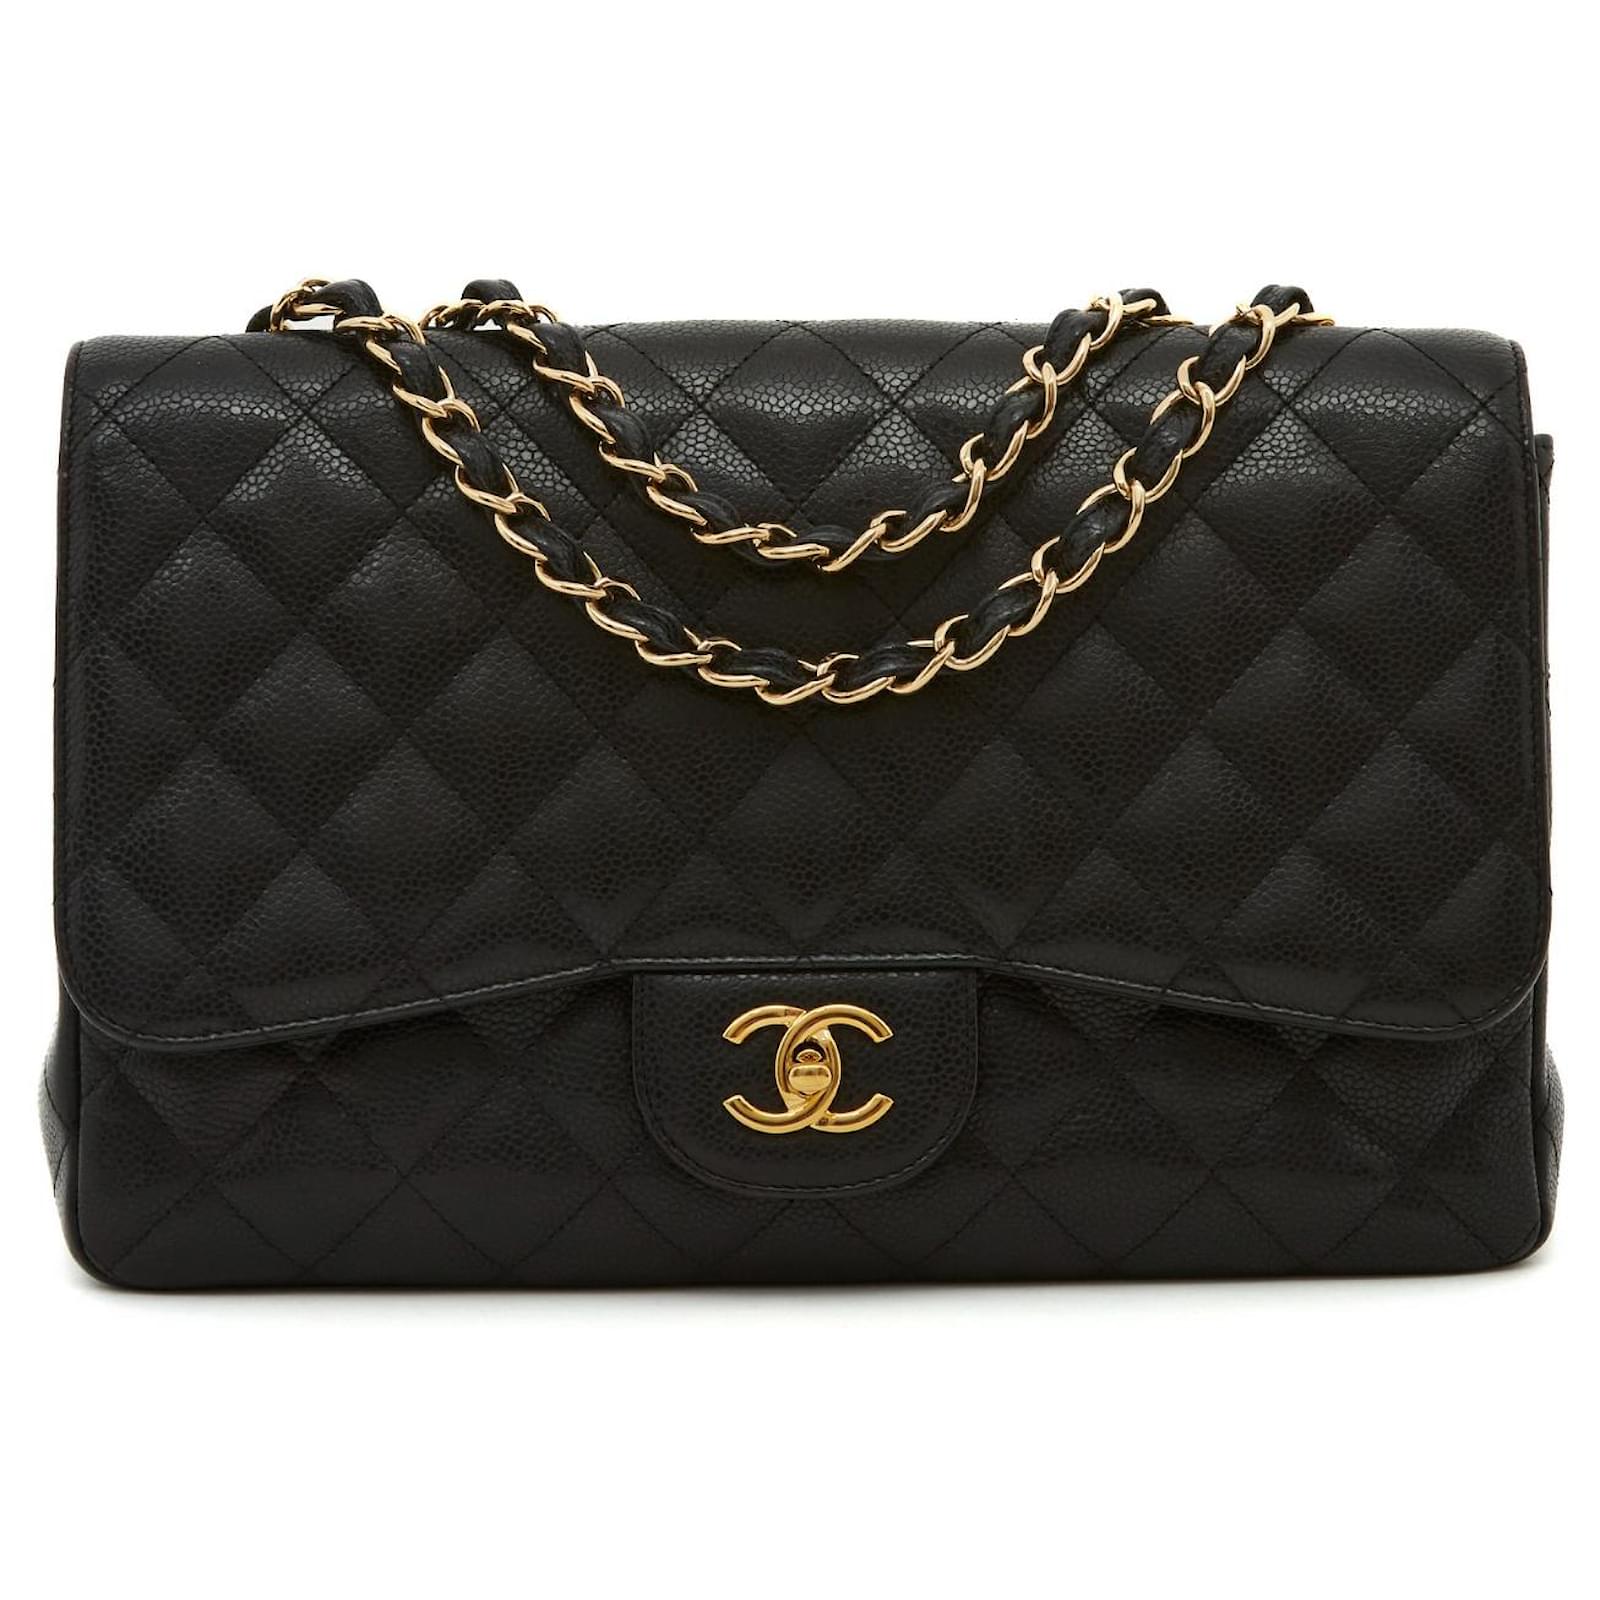 Timeless Chanel LARGE CLASSIC BAG CAVIAR BLACK GOLD Leather ref